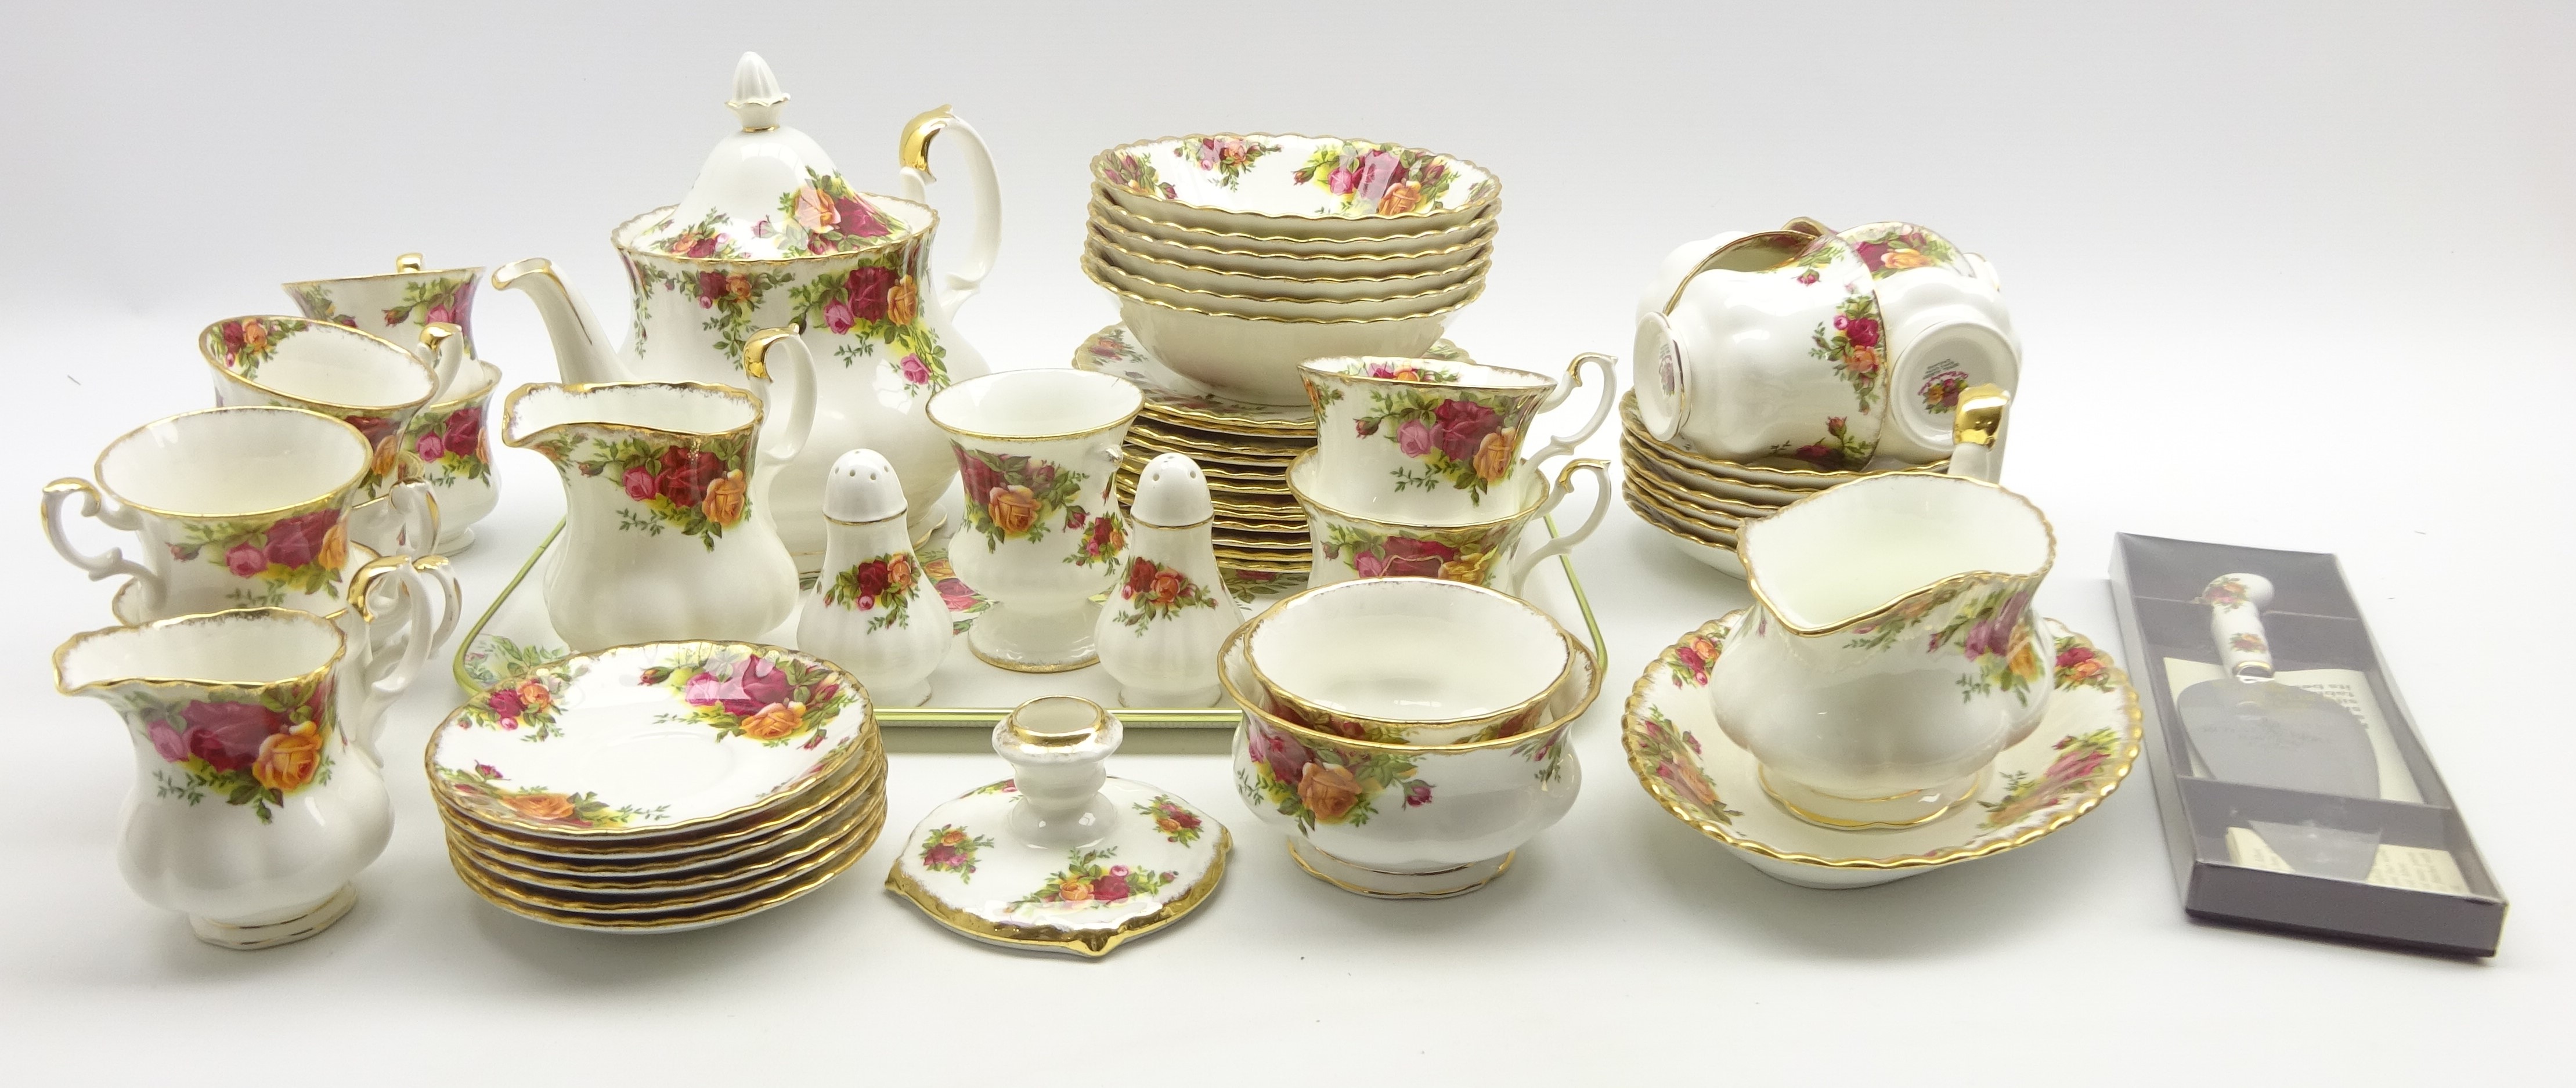 Extensive Royal Albert 'Old Country Roses' table service for dinner, - Image 2 of 4